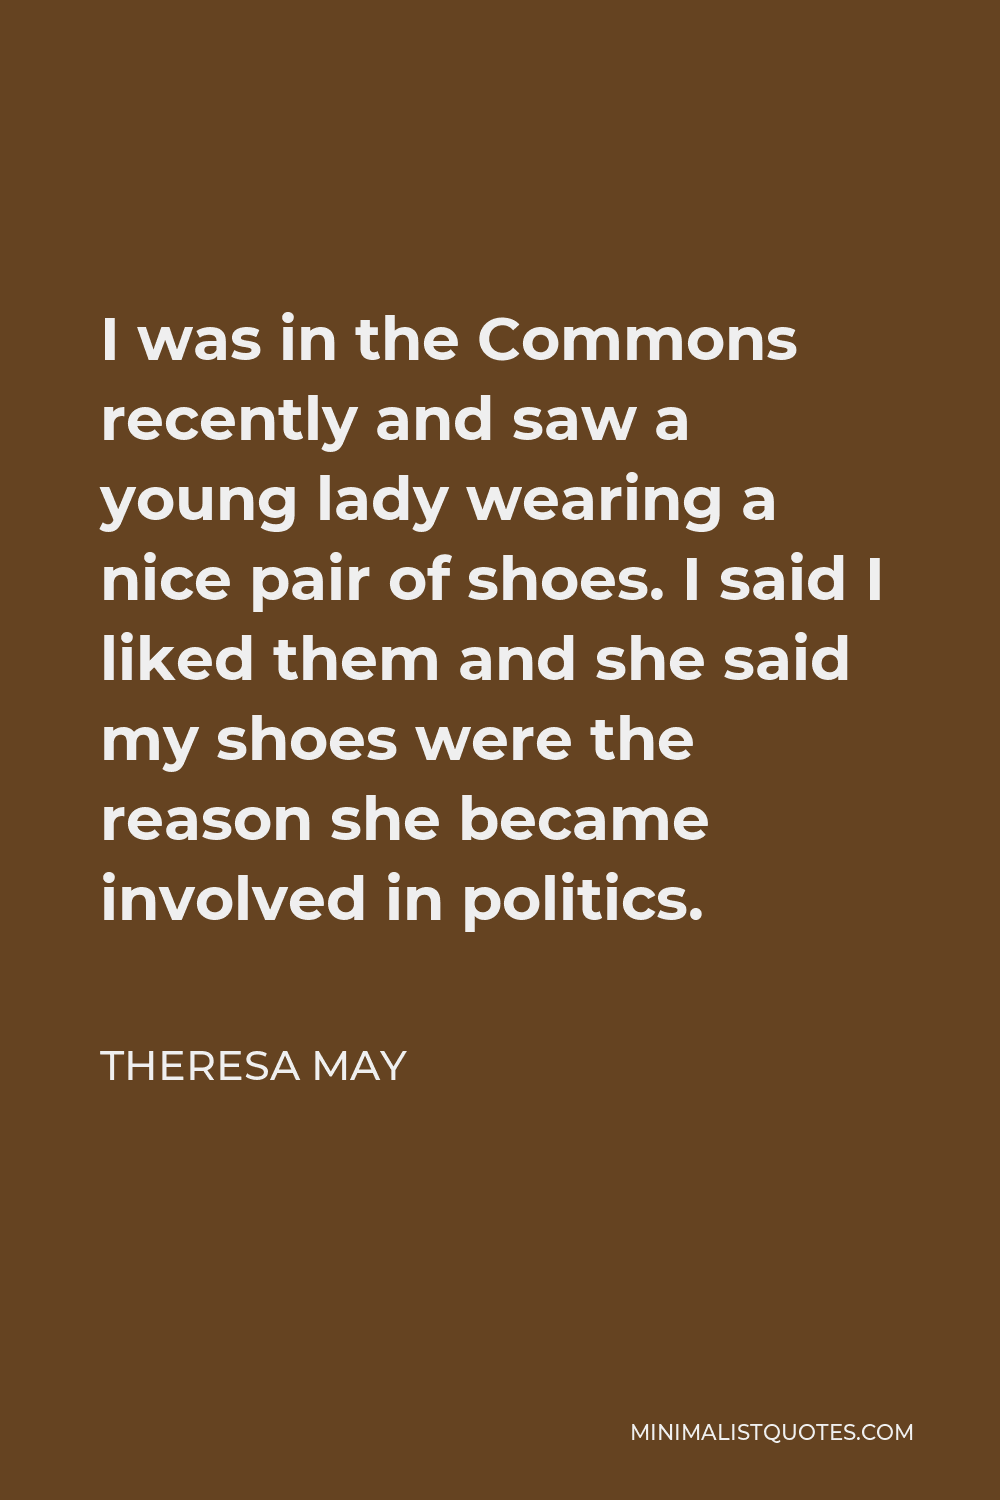 Theresa May Quote - I was in the Commons recently and saw a young lady wearing a nice pair of shoes. I said I liked them and she said my shoes were the reason she became involved in politics.